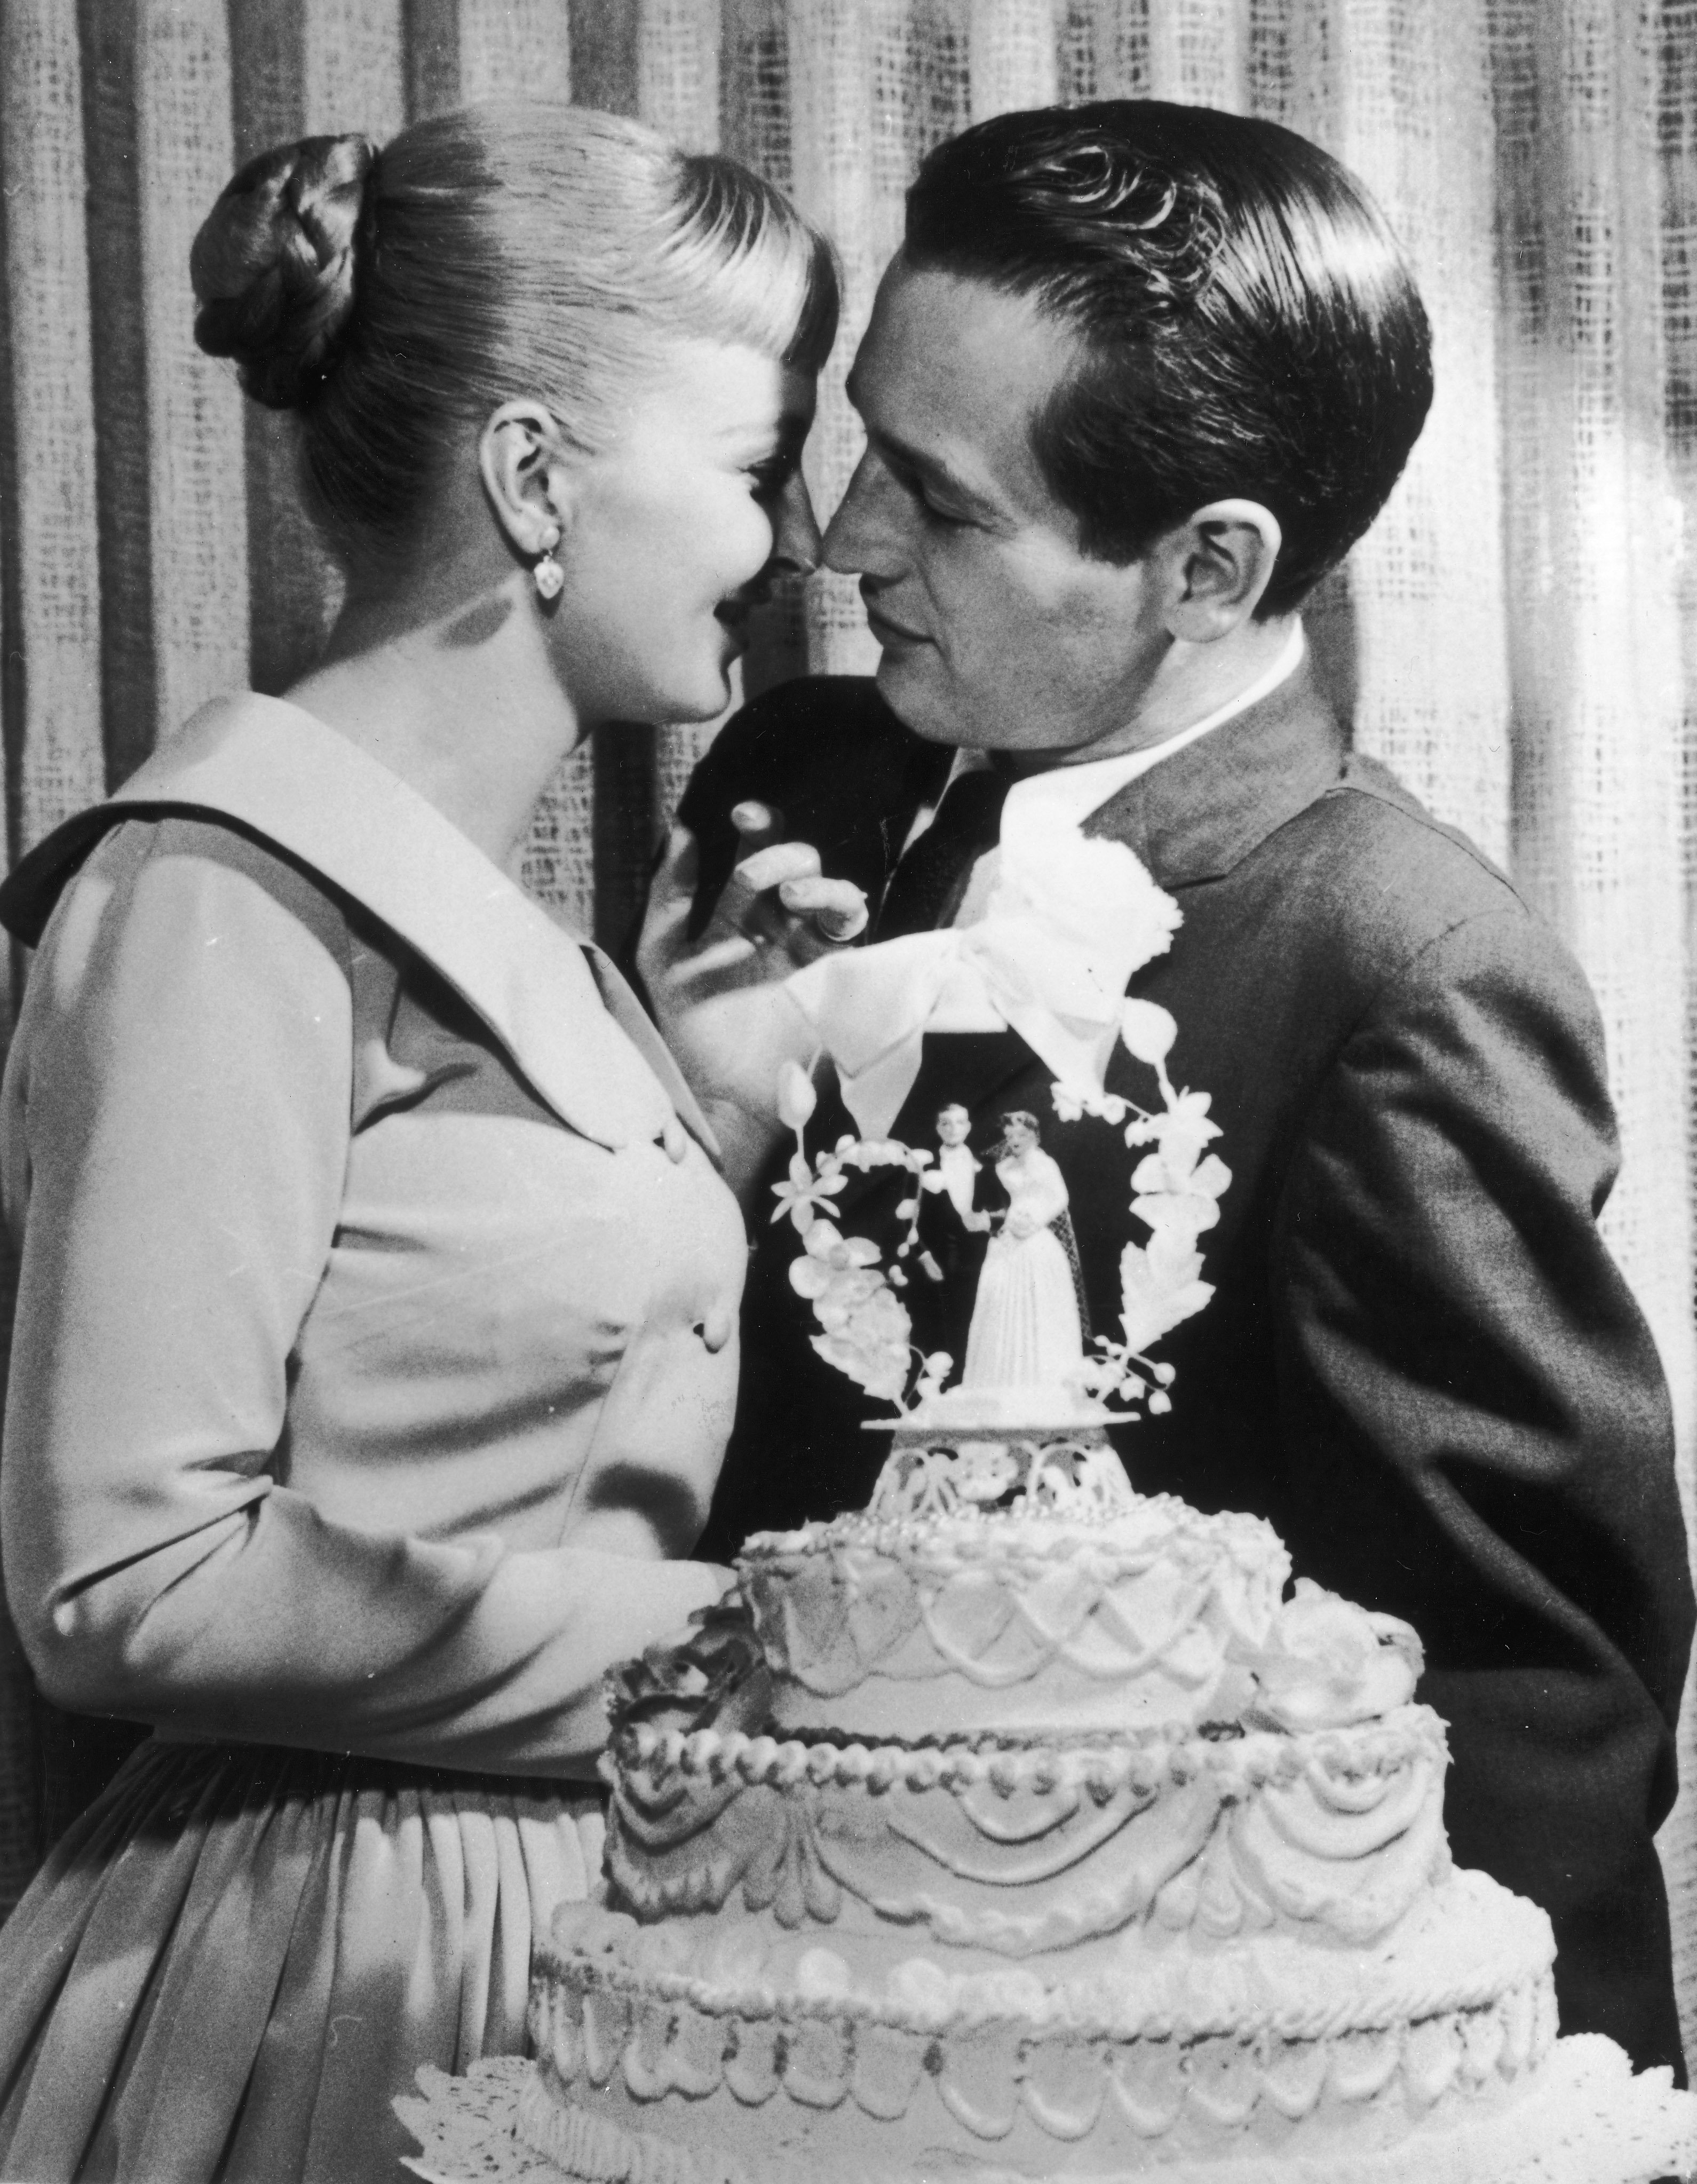 American actors and newlyweds Paul Newman and Joanne Woodward kiss behind a wedding cake during their wedding reception at the El Rancho hotel-casino, Las Vegas, Nevada, January 29, 1958. | Source: Getty Images